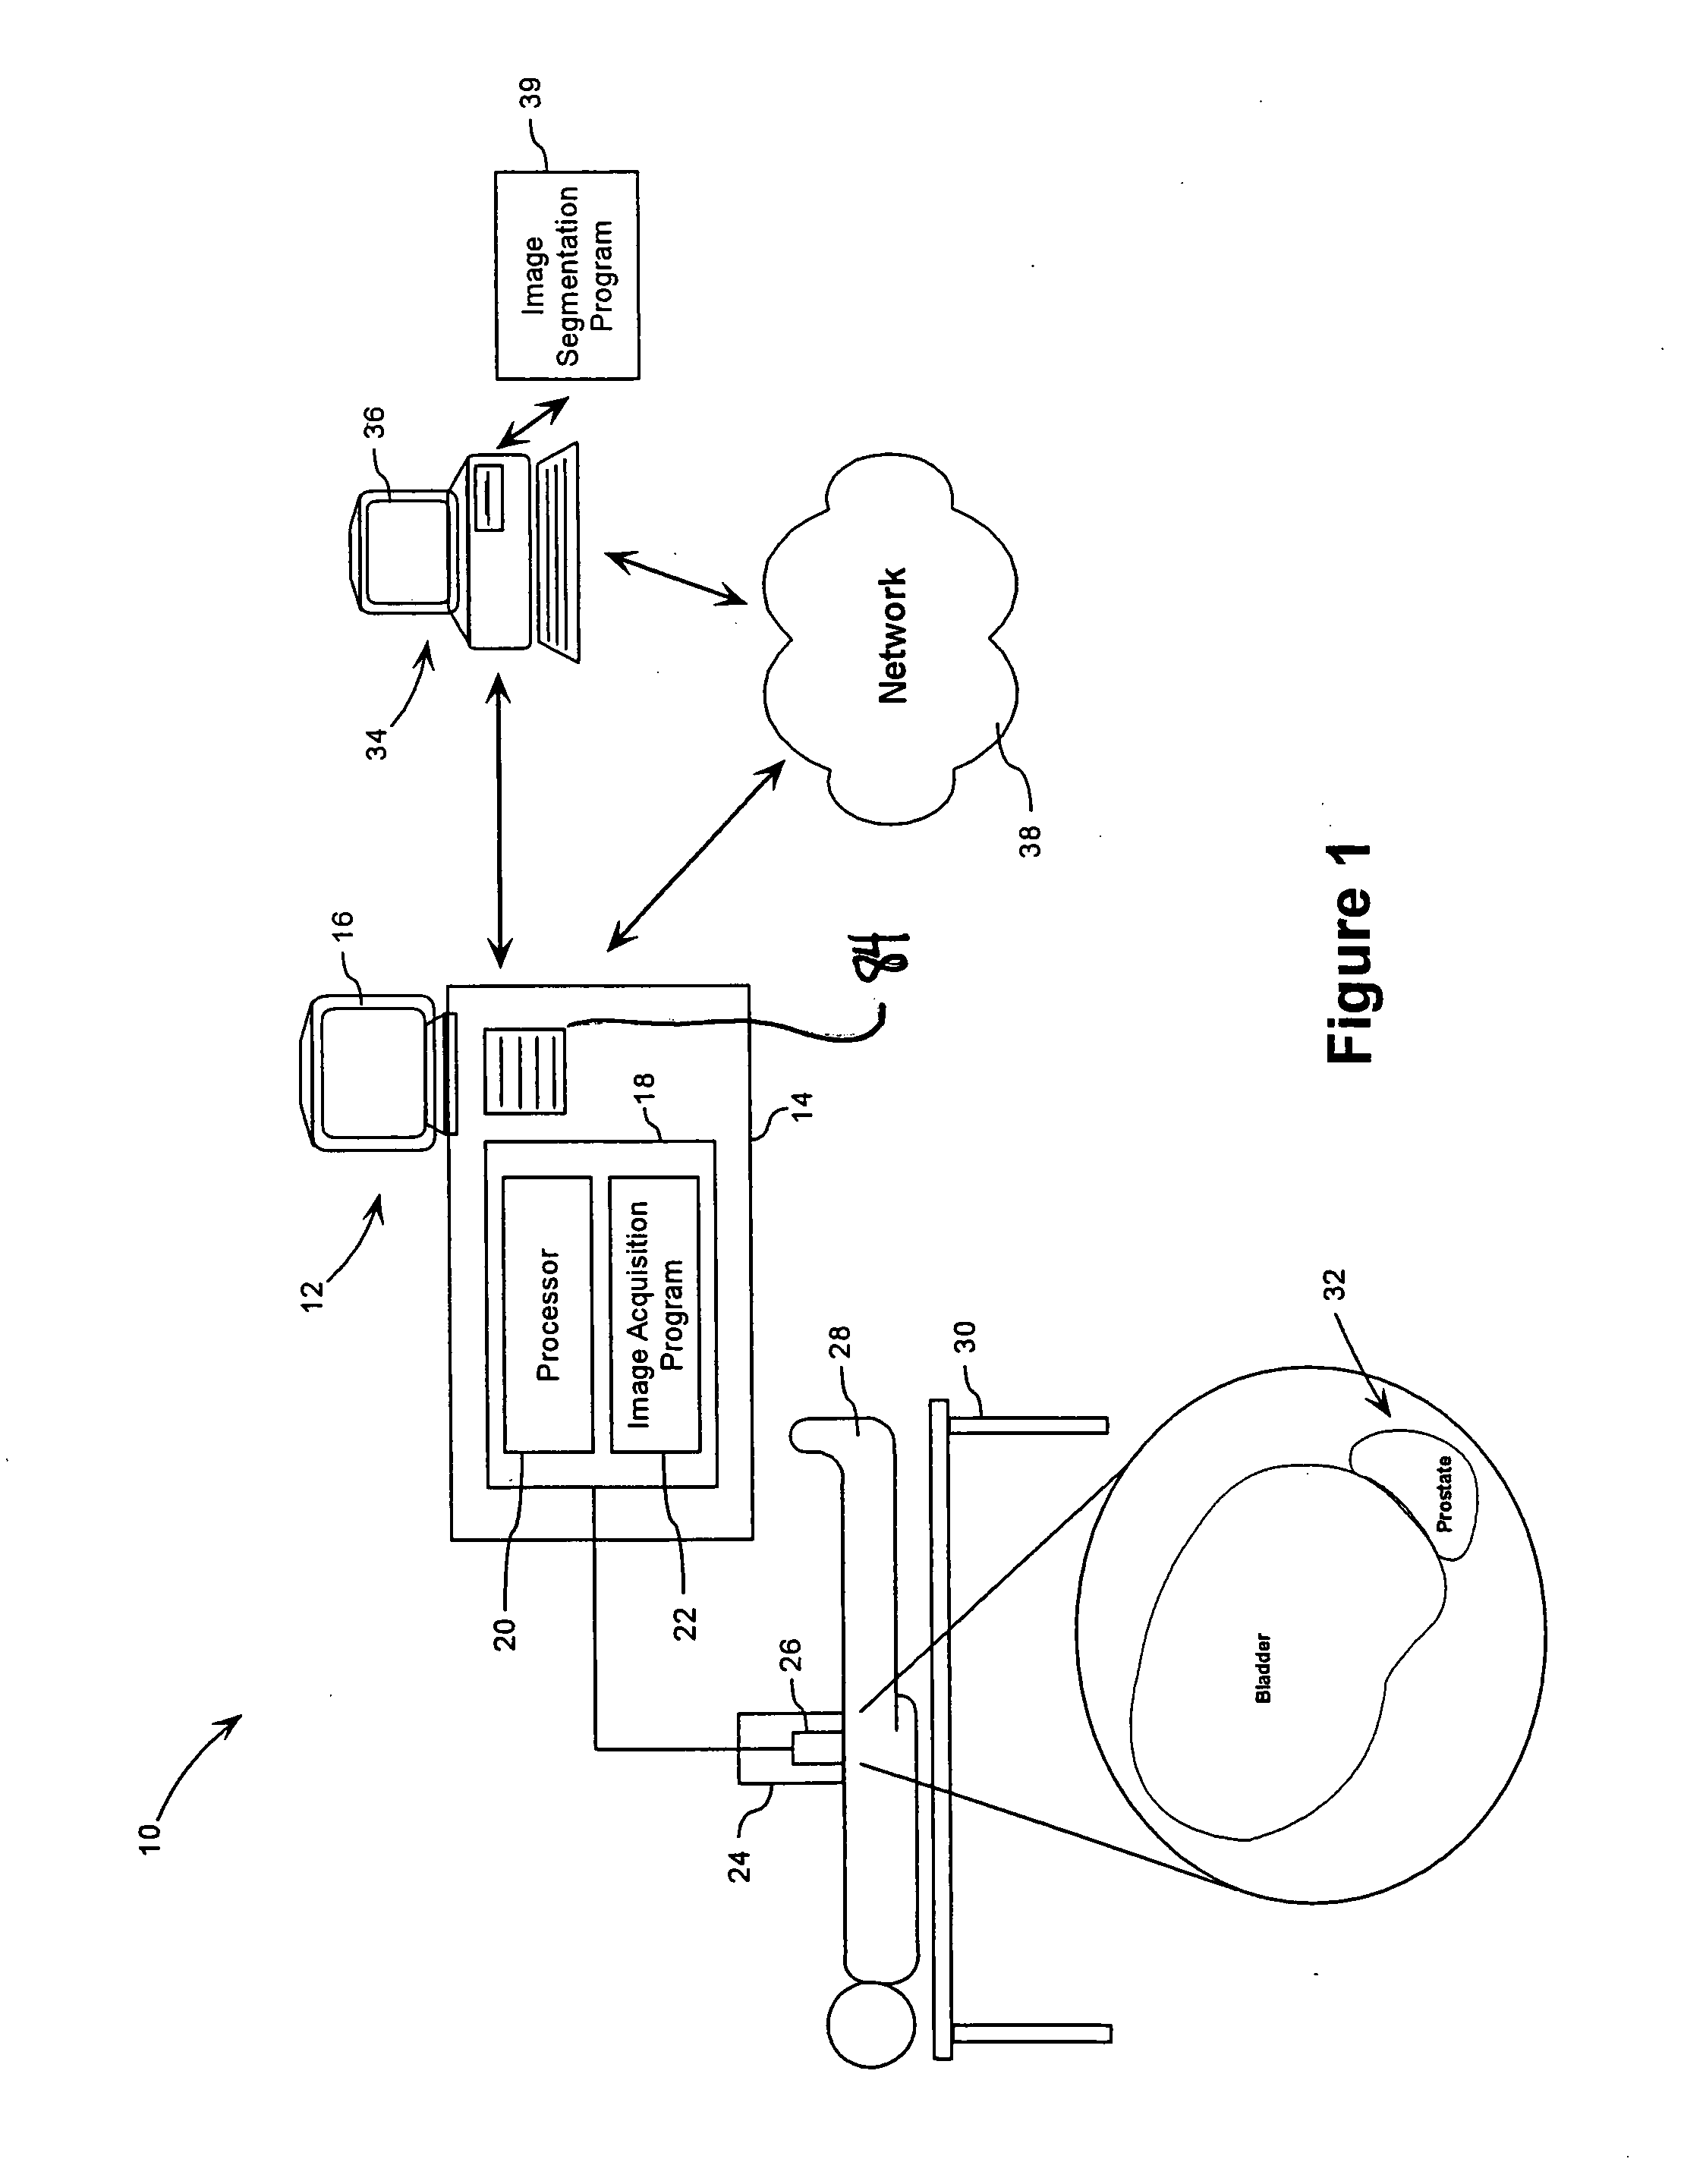 System and Method for Segmenting a Region in a Medical Image